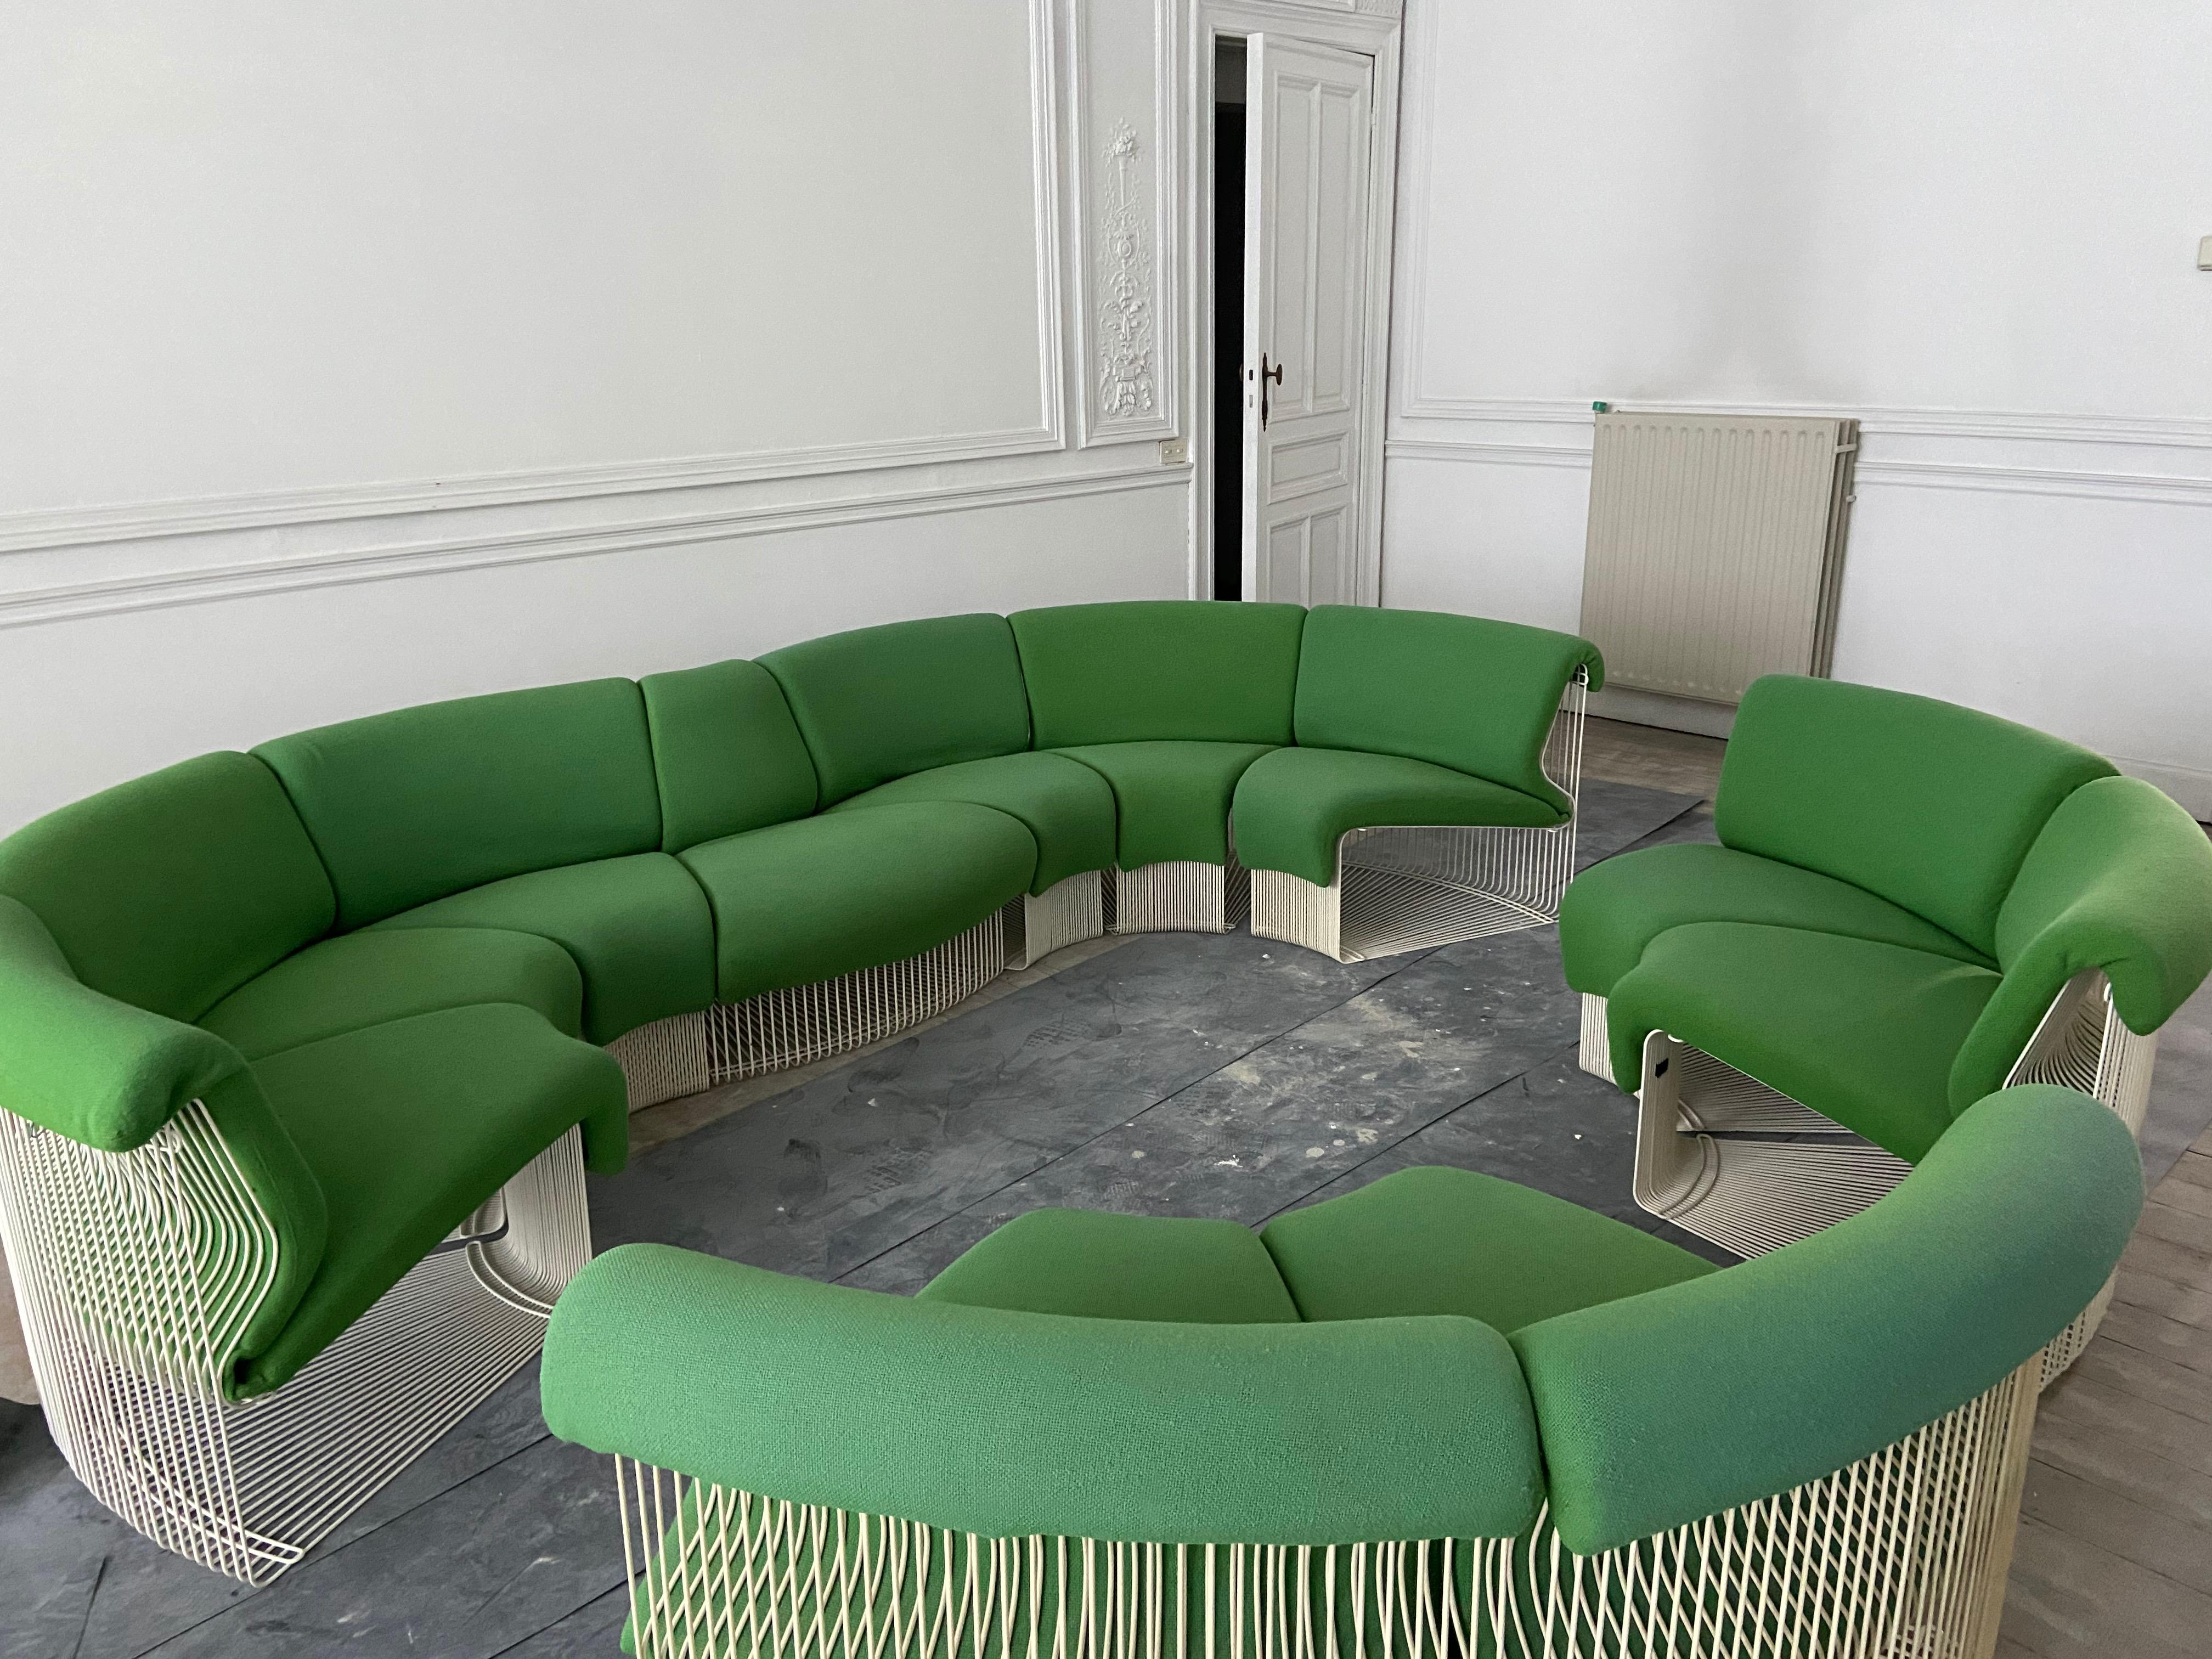 Beautiful and rare sofa designed by Verner Panton and produced in 1975 by Fritz Hansen. The set consists of ten concave modules and a convex module, the eleven modules are made of steel wire and a seat made of green wool sheets.

Magnifique et